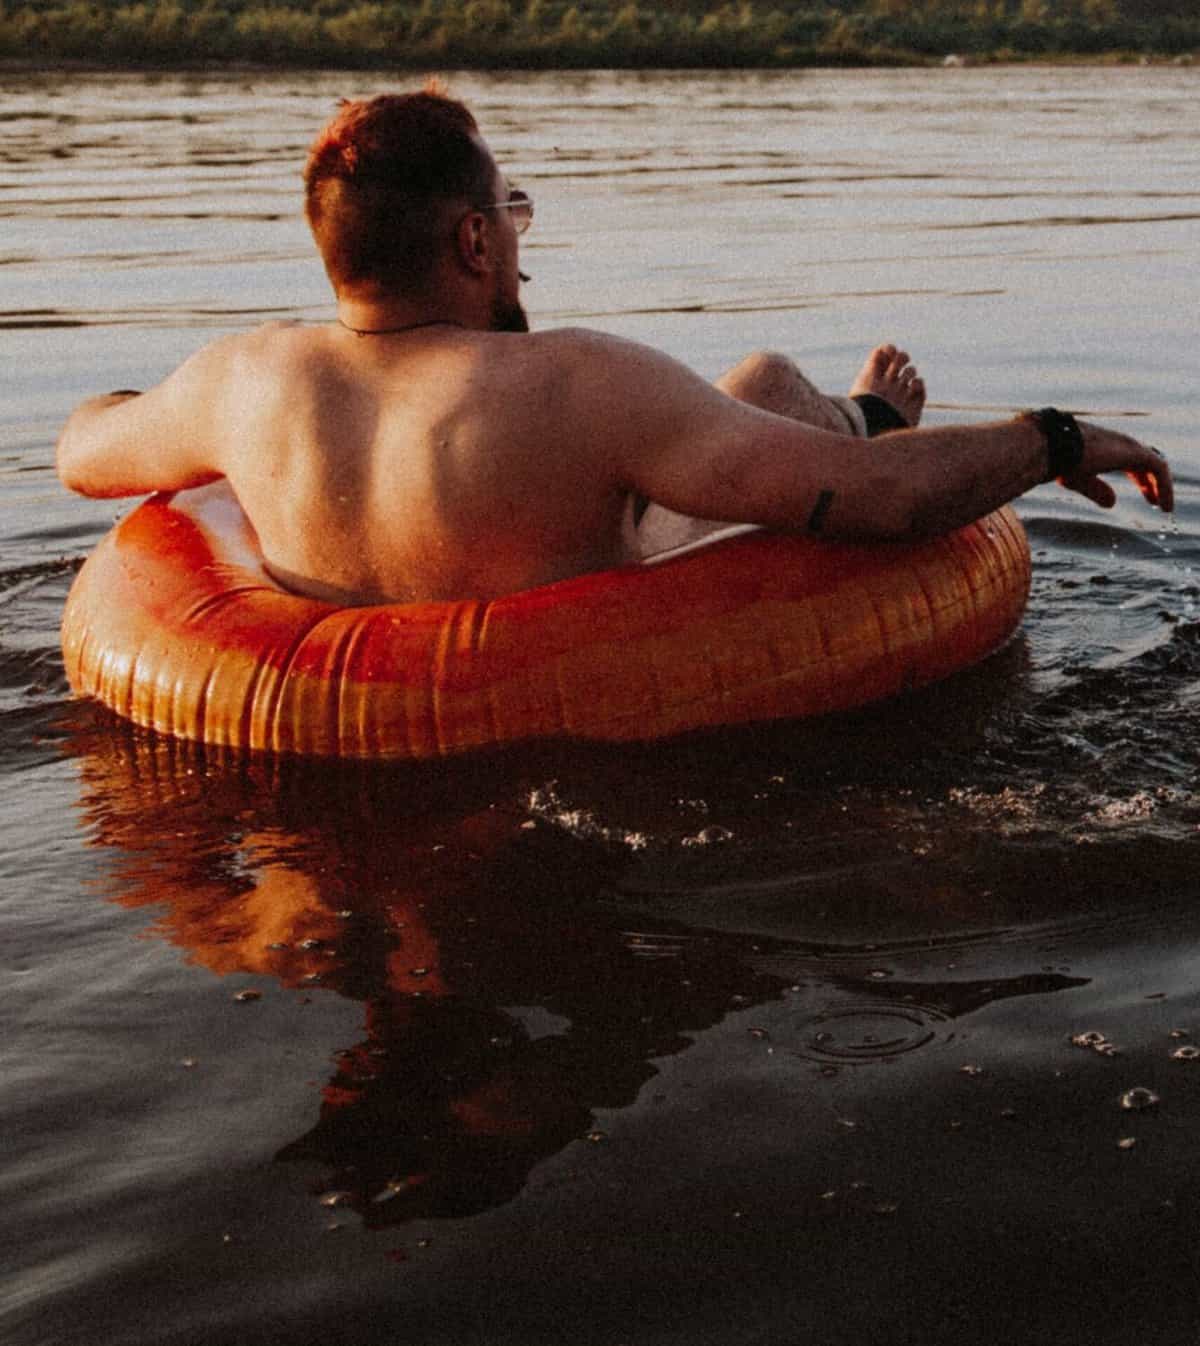 man tubing on a river